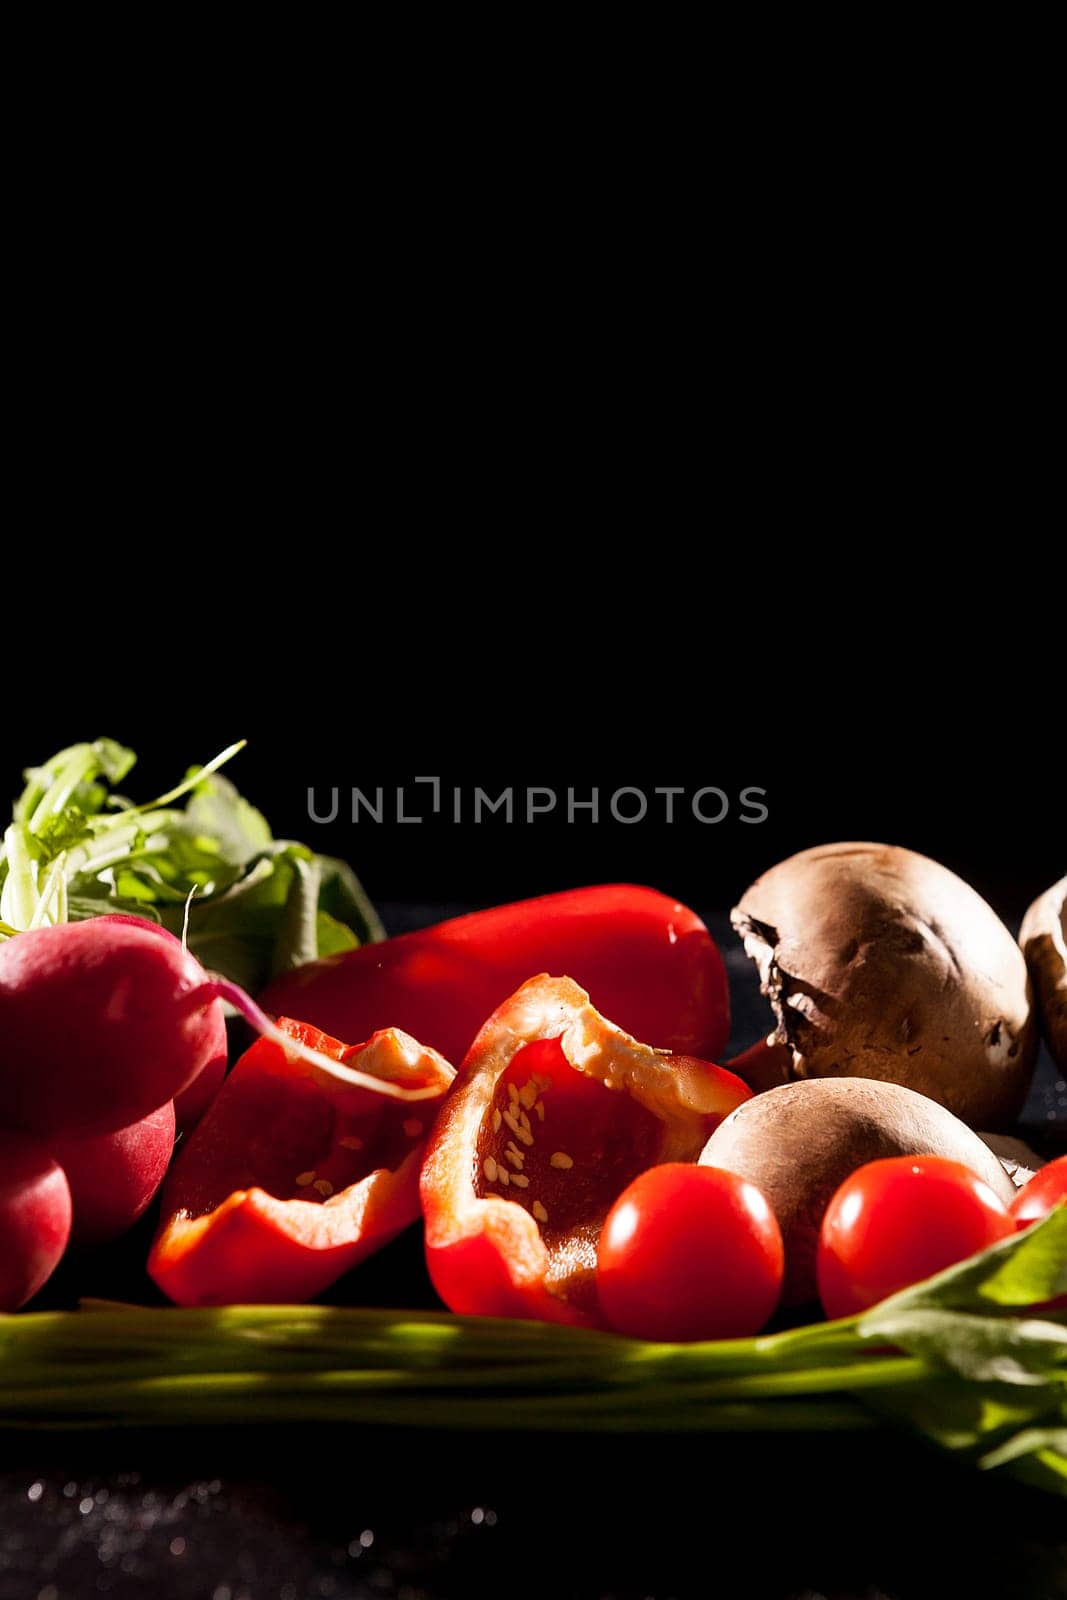 Artistic image of different type of healthy organic vegetables on dark background in studio photo